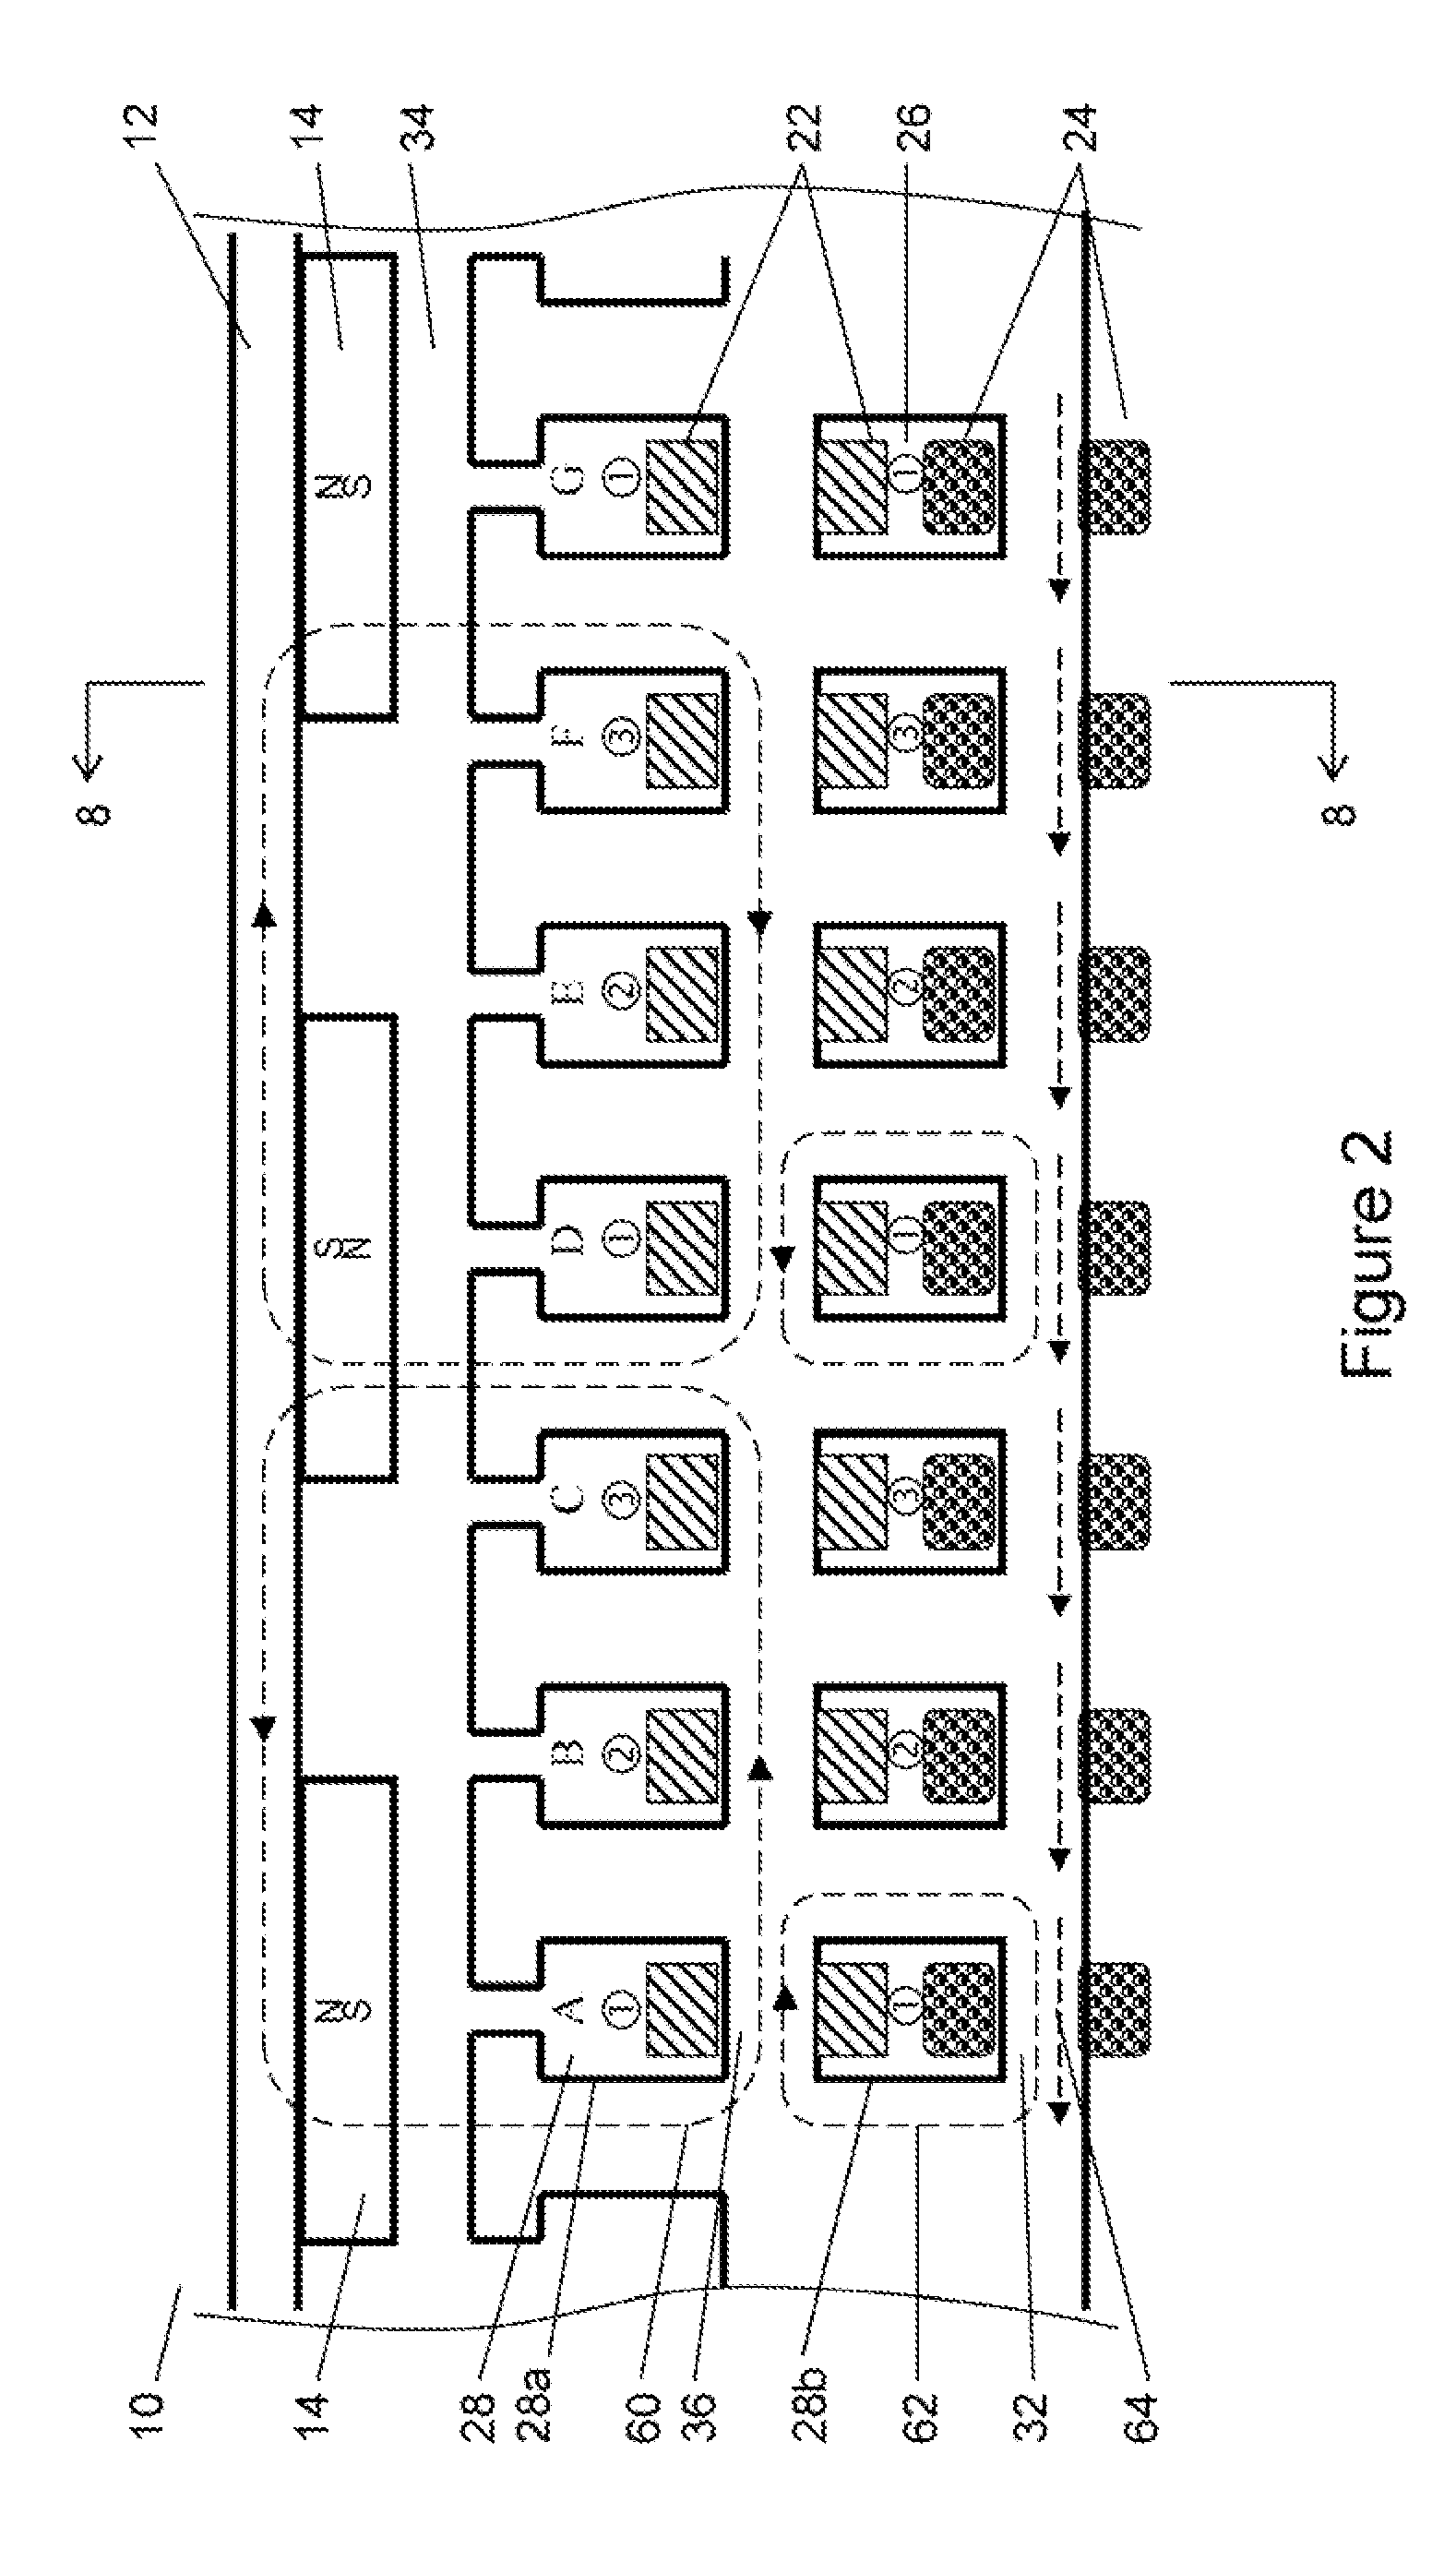 Saturation control of electric machine